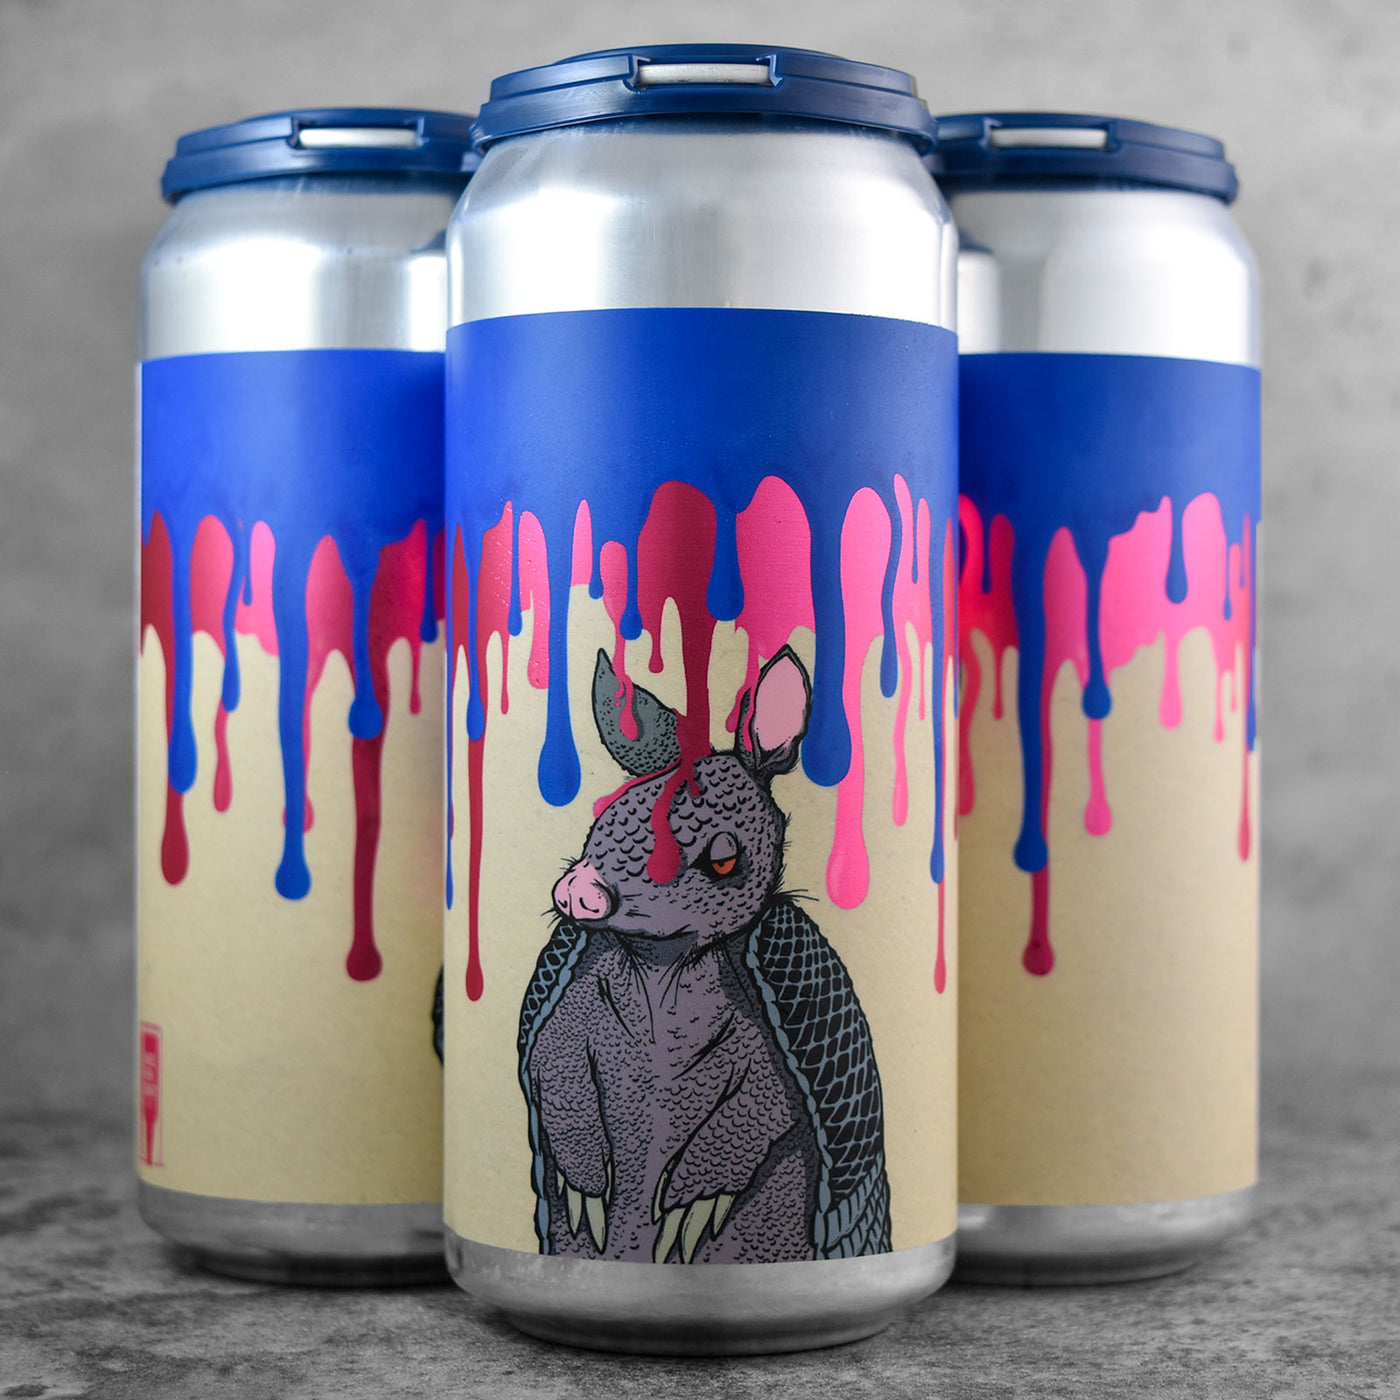 Tripping Animals Brewing/ Urban South - Crazy Blue Raspberry Fanta And Ice Cream "Limit 2"